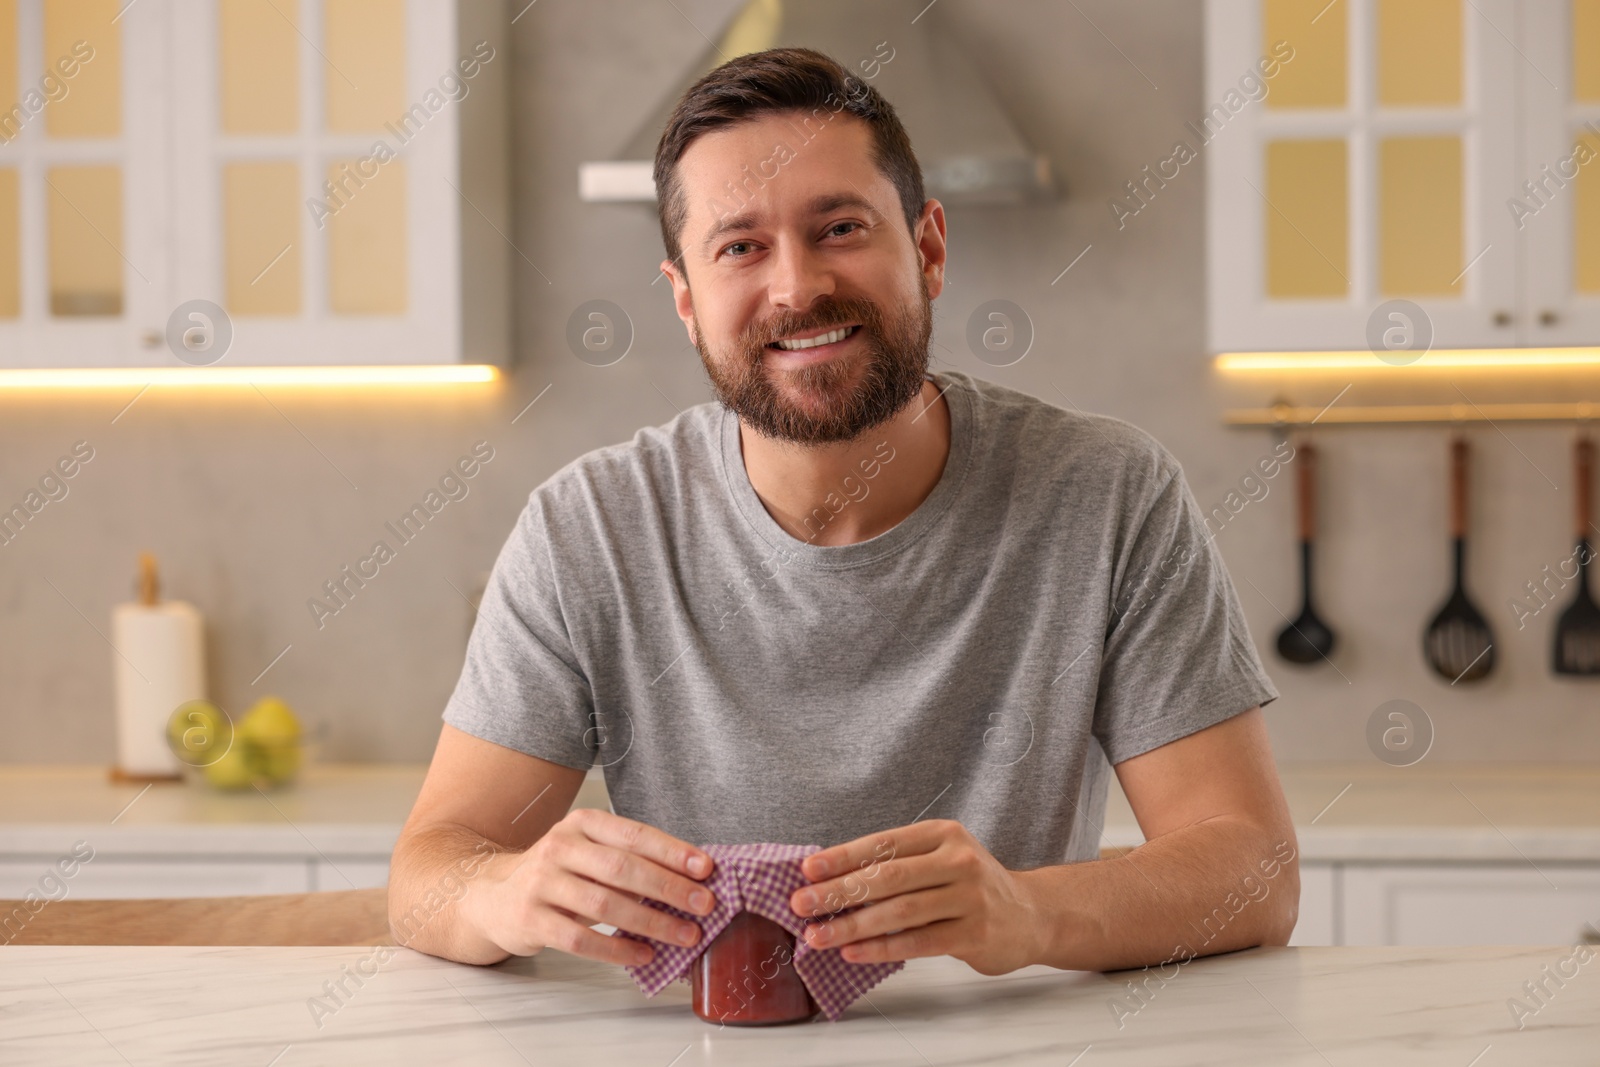 Photo of Man packing jar of jam into beeswax food wrap at table in kitchen